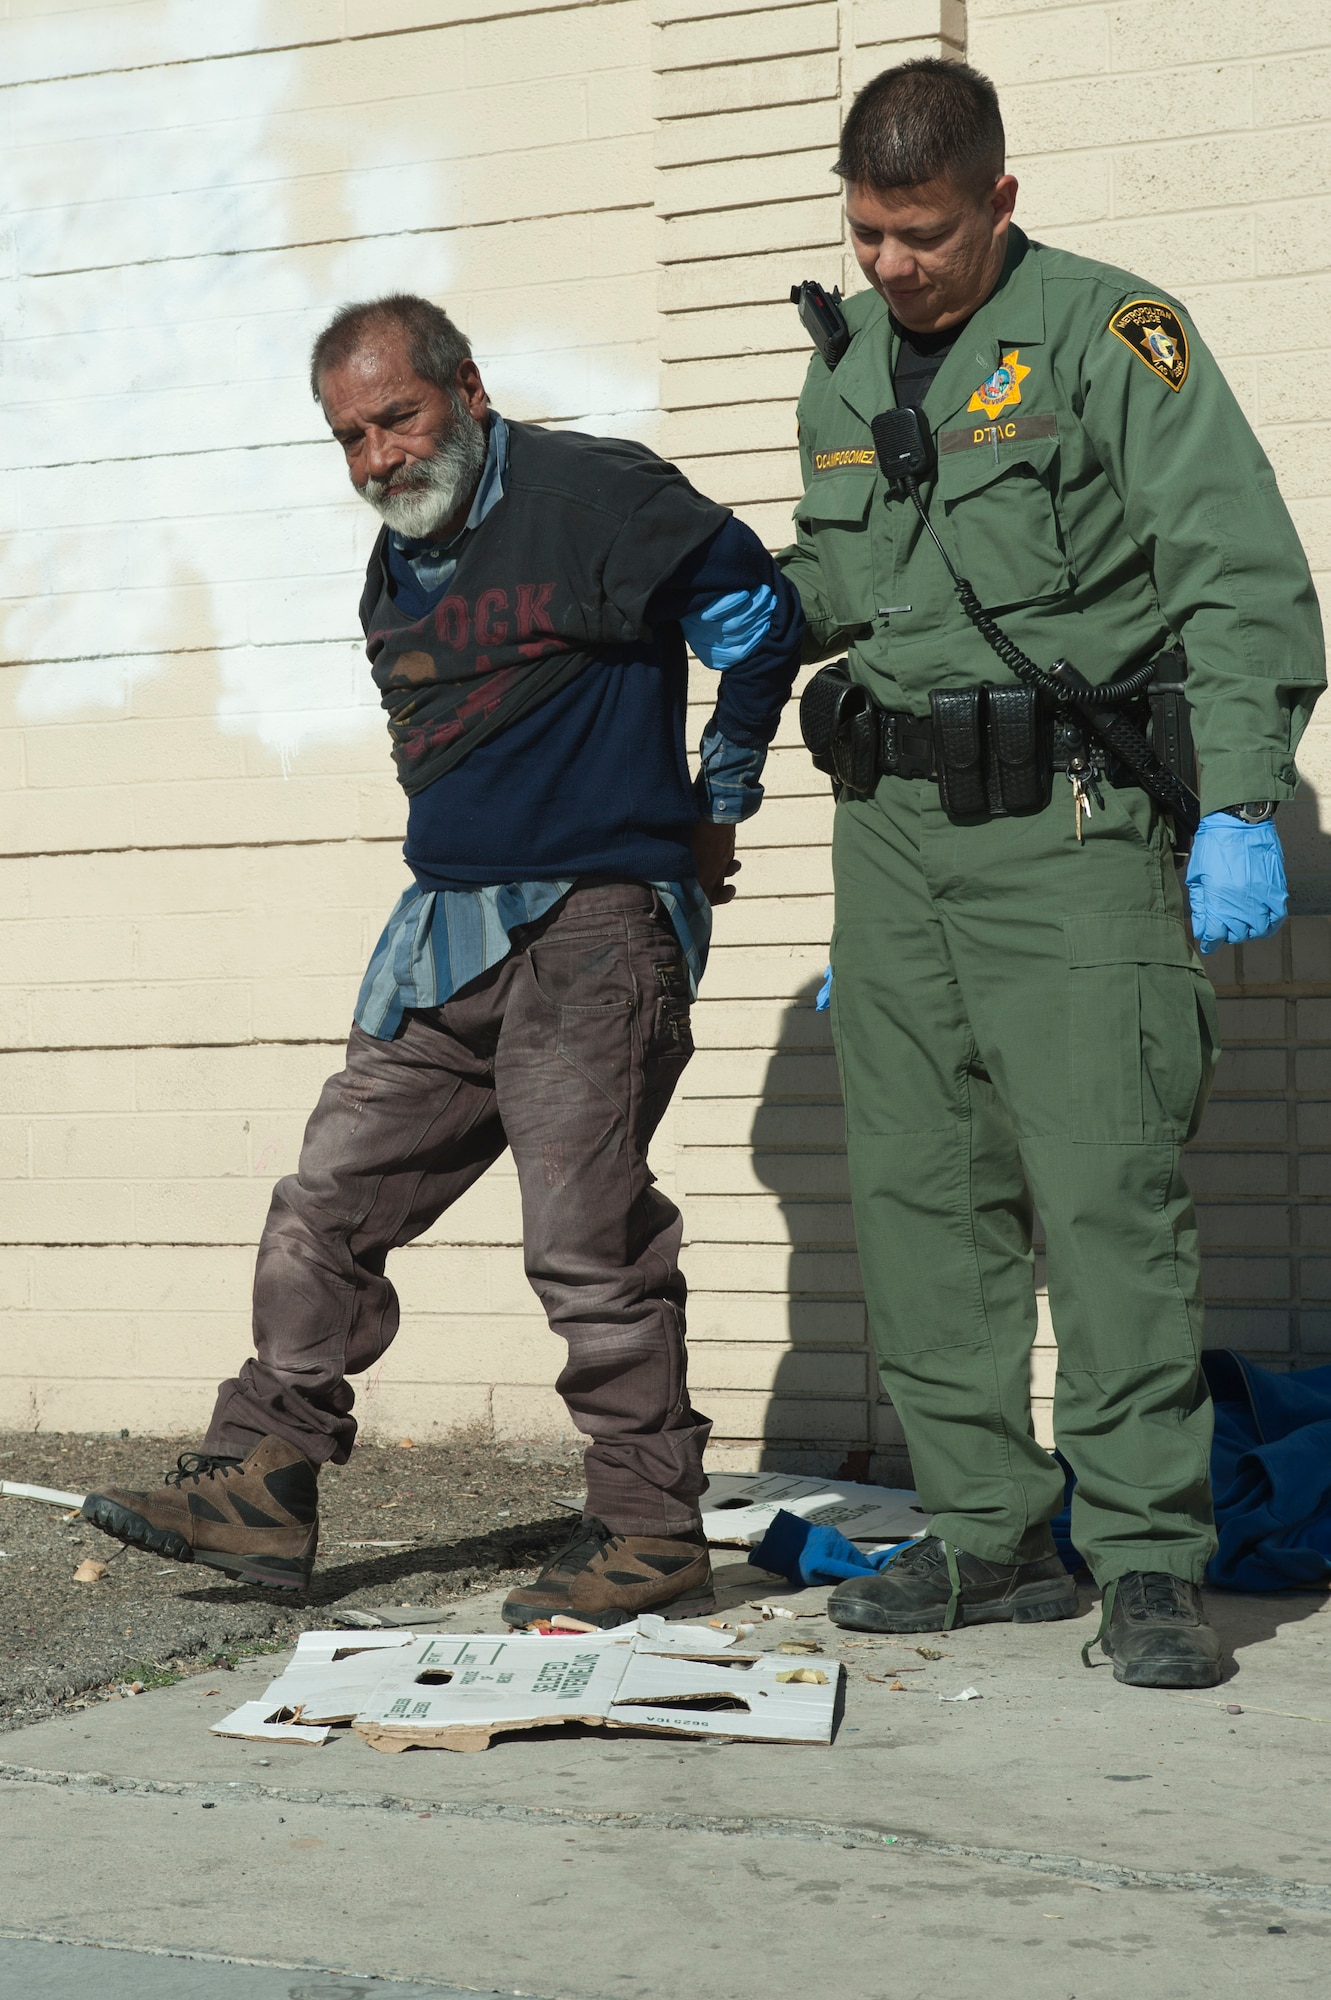 Aden Ocampogomez, Las Vegas Metropolitan Police Department police officer, helps a homeless man up before putting him in the back of his police car for drinking alcohol on the sidewalk in downtown Las Vegas Jan. 14, 2014. It is against the law to drink alcohol on the street while not on a casino’s property. (U.S. Air Force photo by Airman 1st Class Timothy Young)